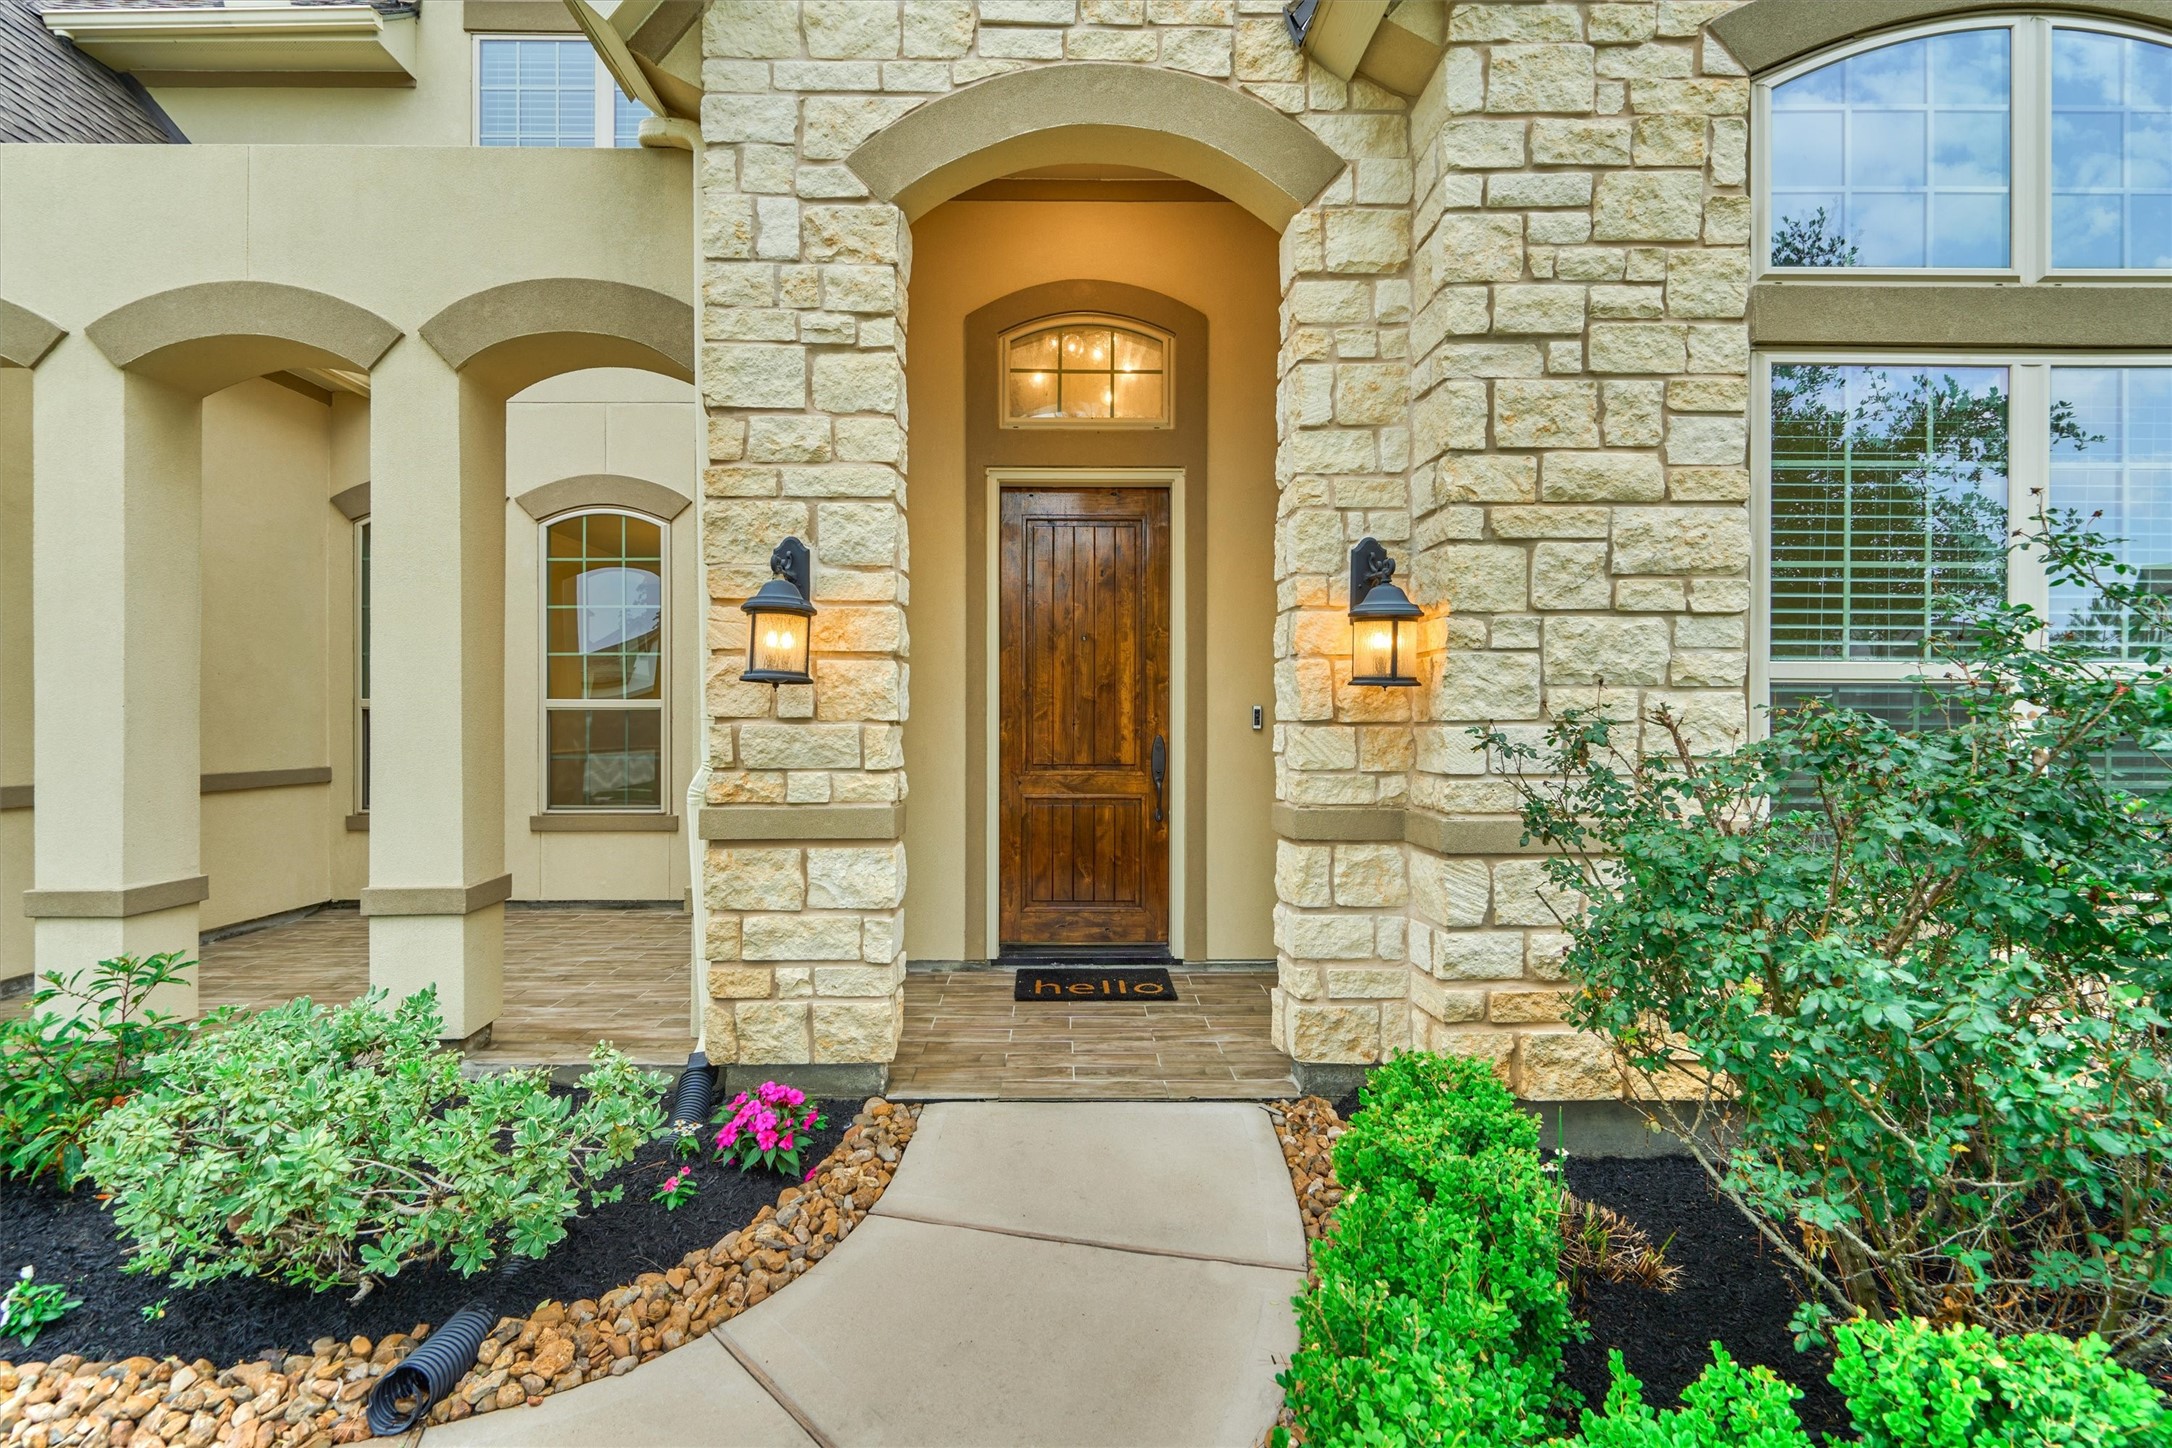 Stately front door and entryway leading into a grand foyer with high ceilings and natural light.